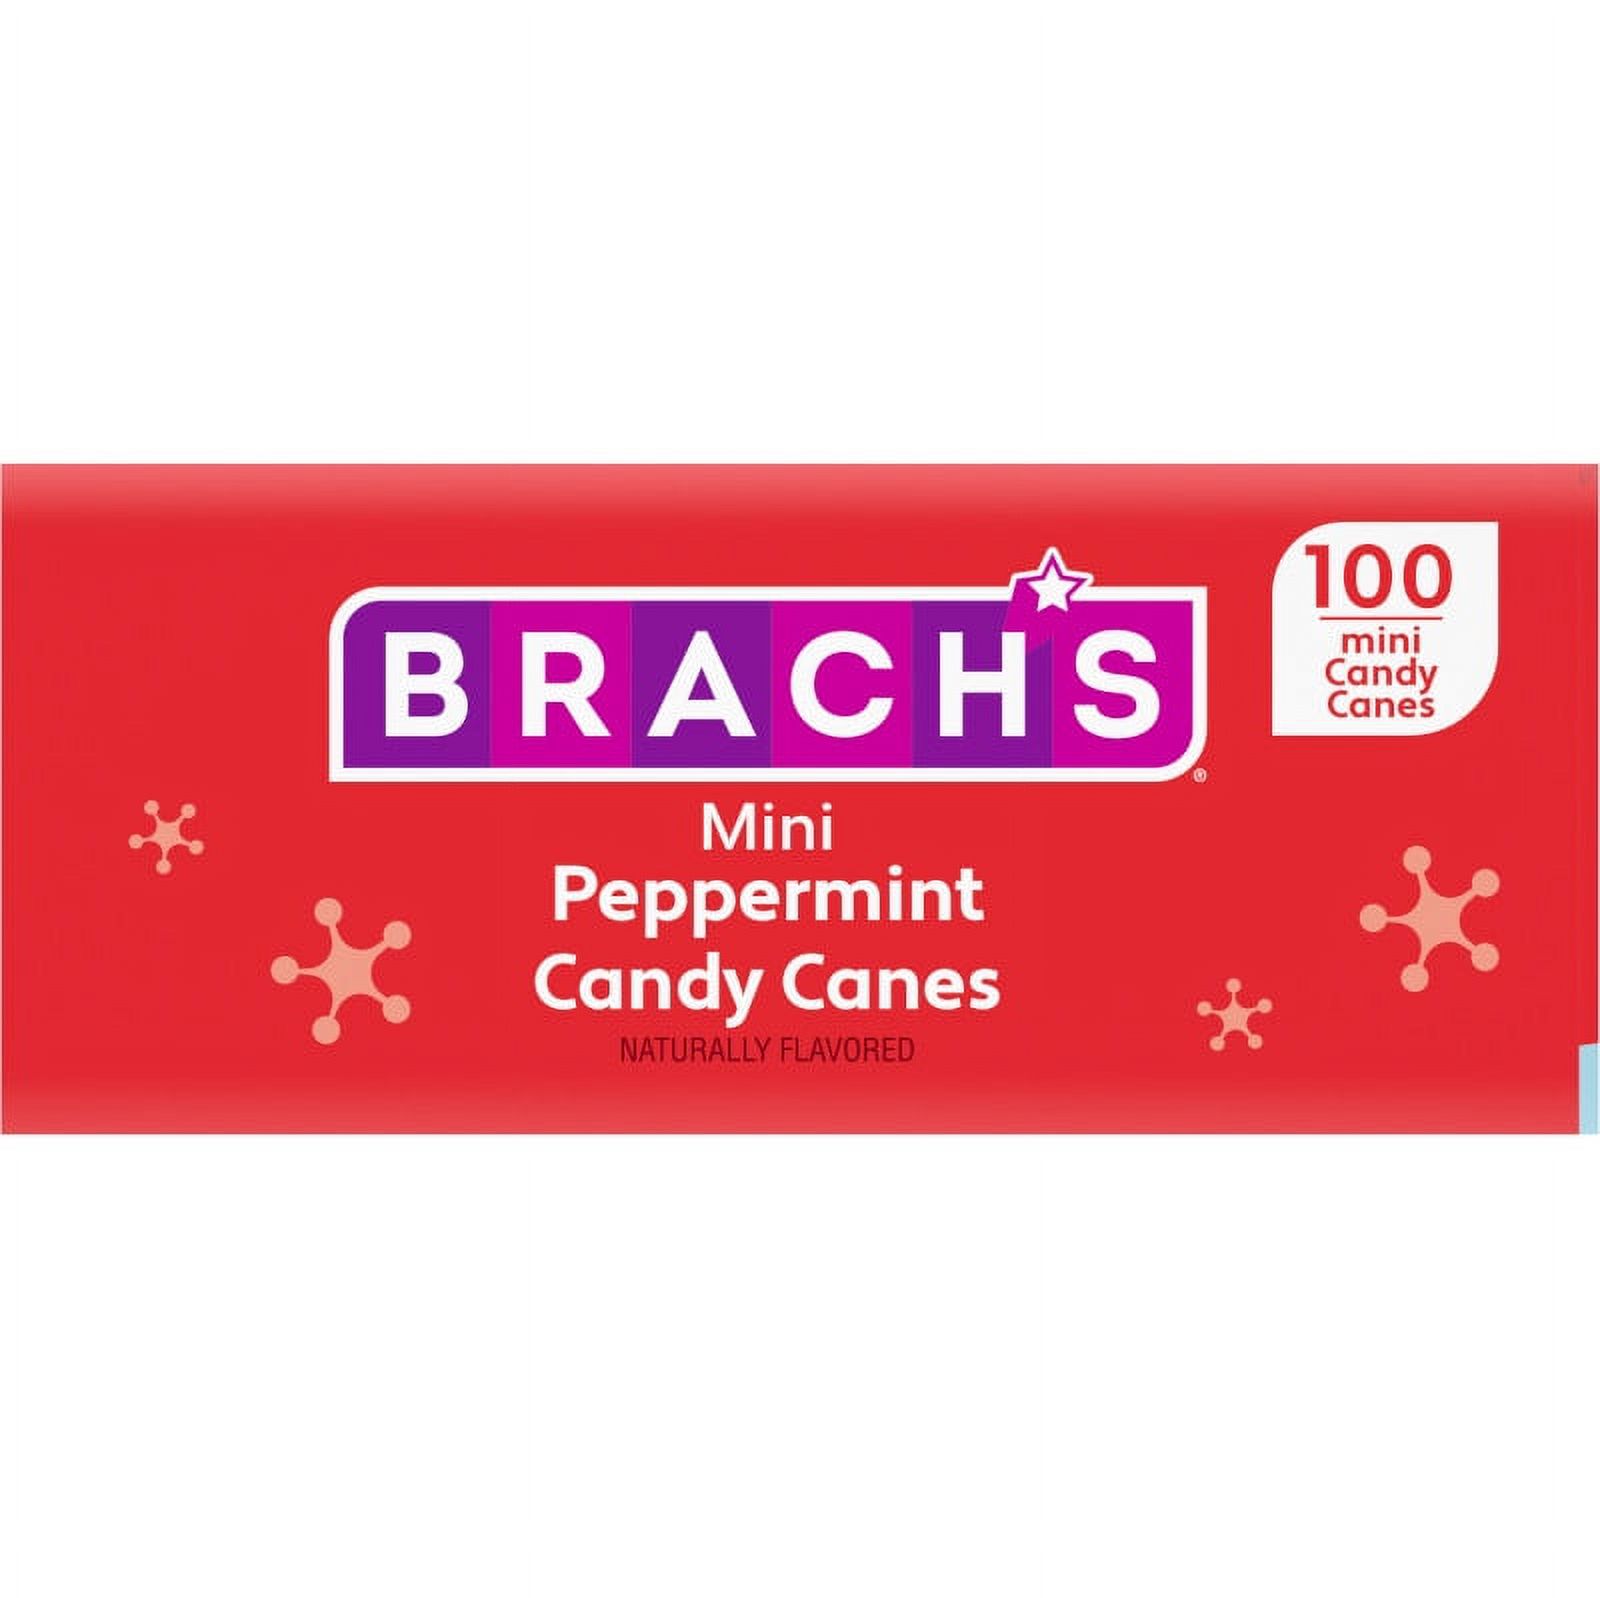 Brach's Mini Peppermint Holiday Candy Canes, Christmas Stocking Stuffer Candy, 100ct Box, 15oz - image 5 of 12